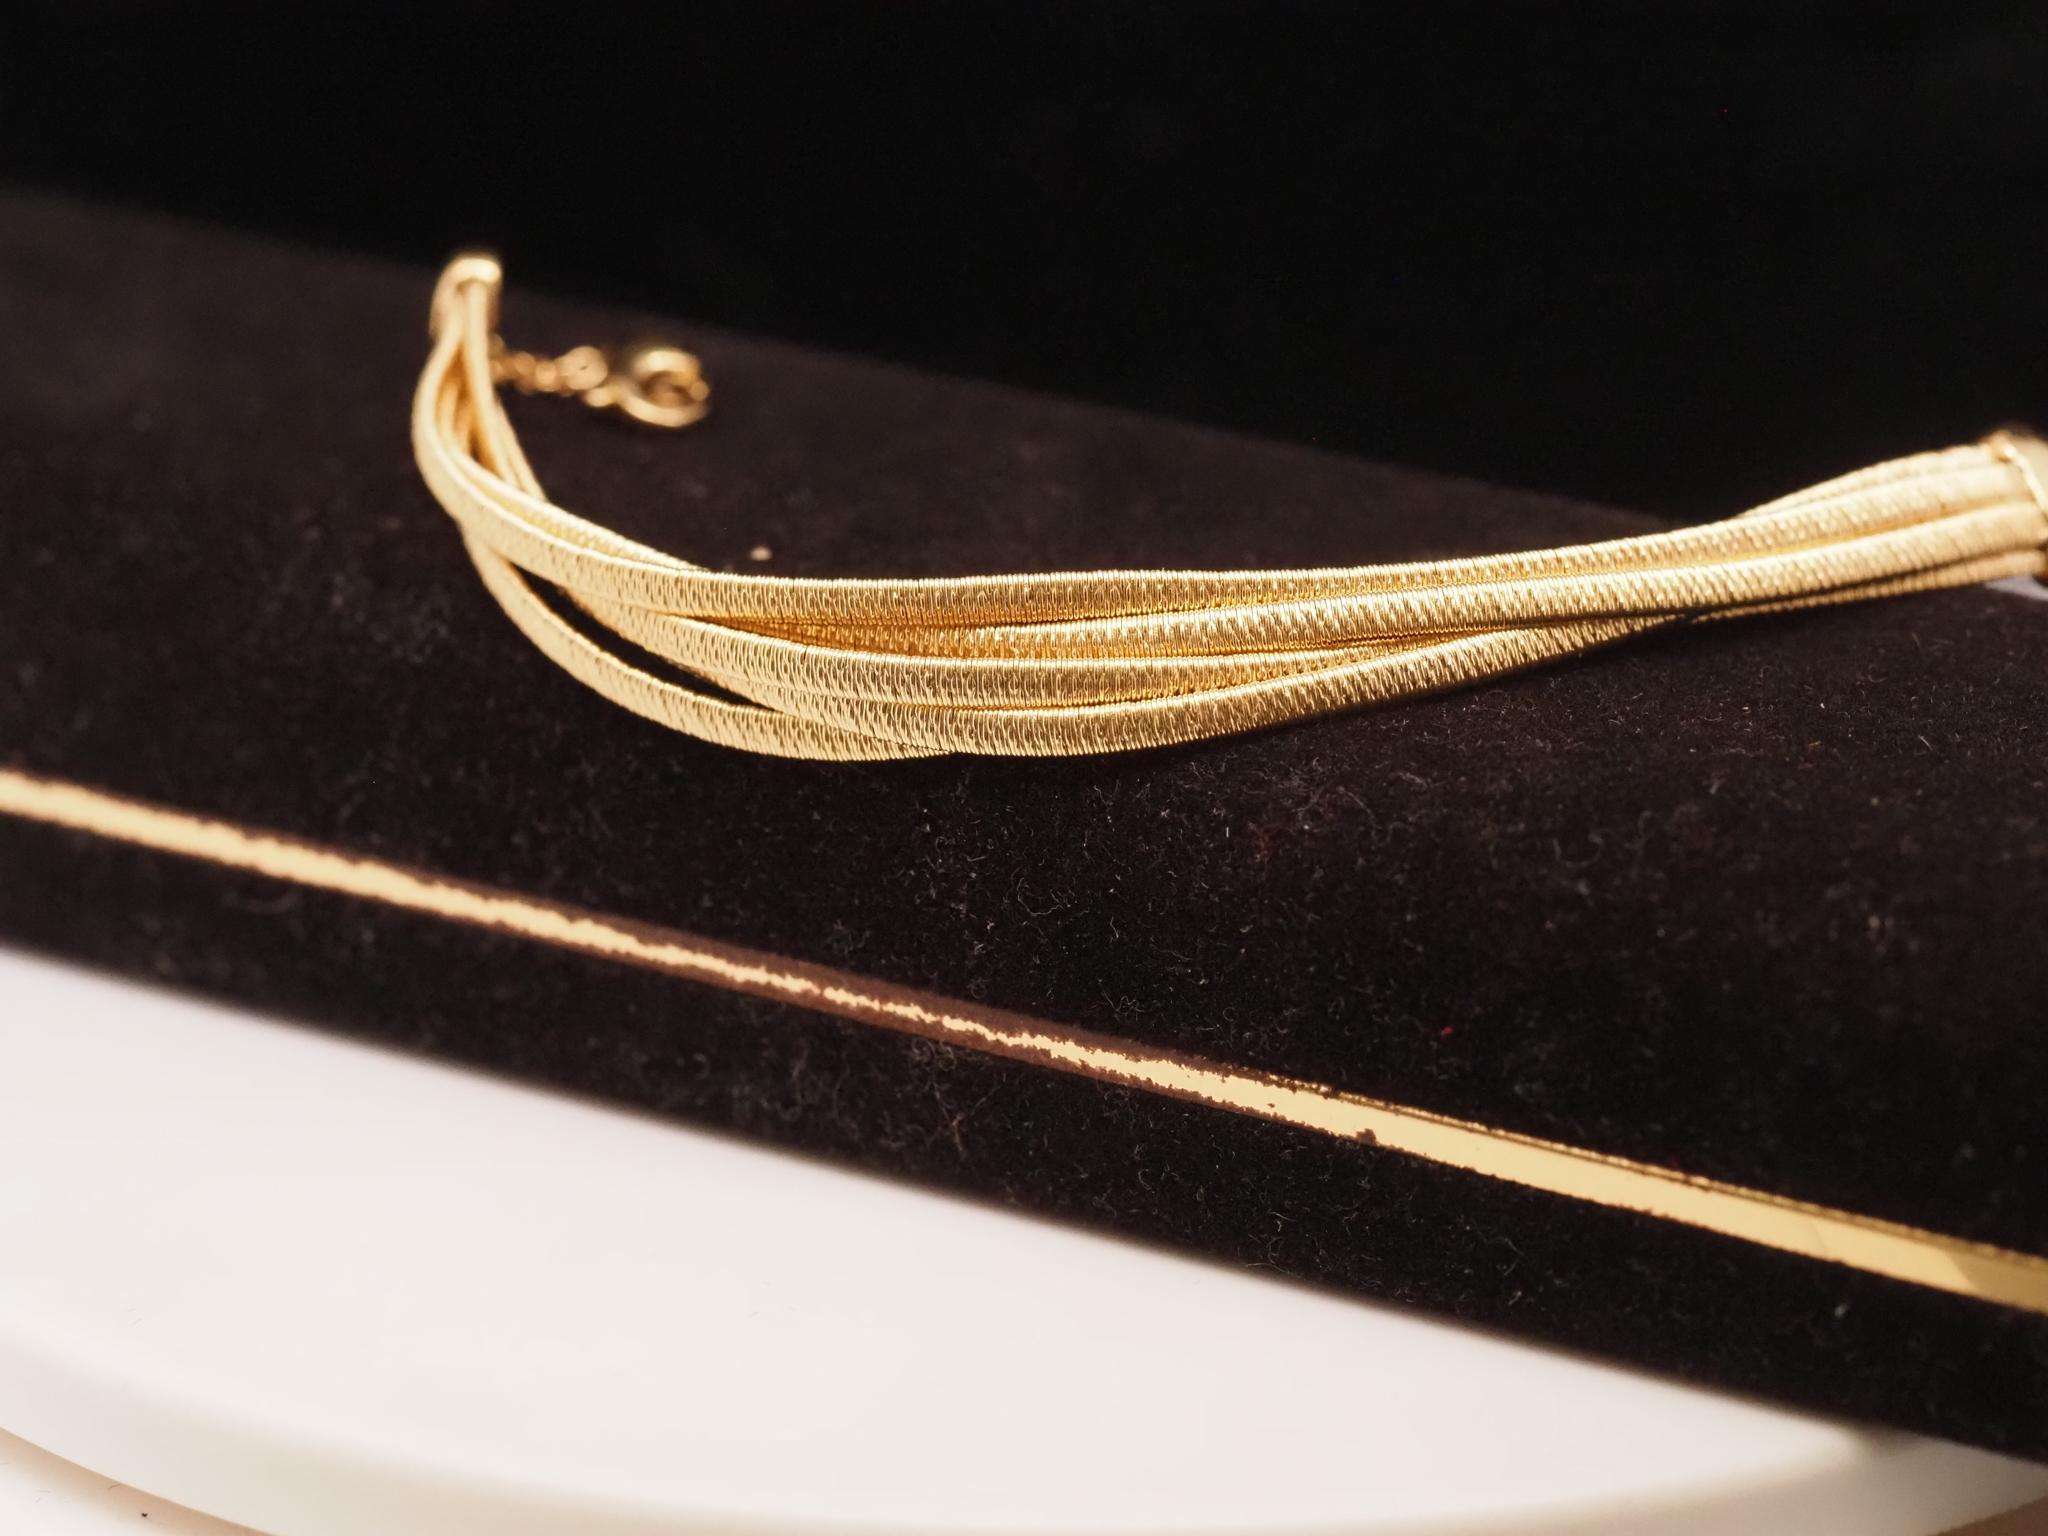 Item Details:
Metal Type: 18K Yellow Gold [Hallmarked, and Tested]
Weight: 17.1 grams (All Items Total)
Bracelet Length Measurement: 7 Inches Long
Bracelet Width Measurement: .3 Inches Wide
Condition: Excellent
Era: Contemporary